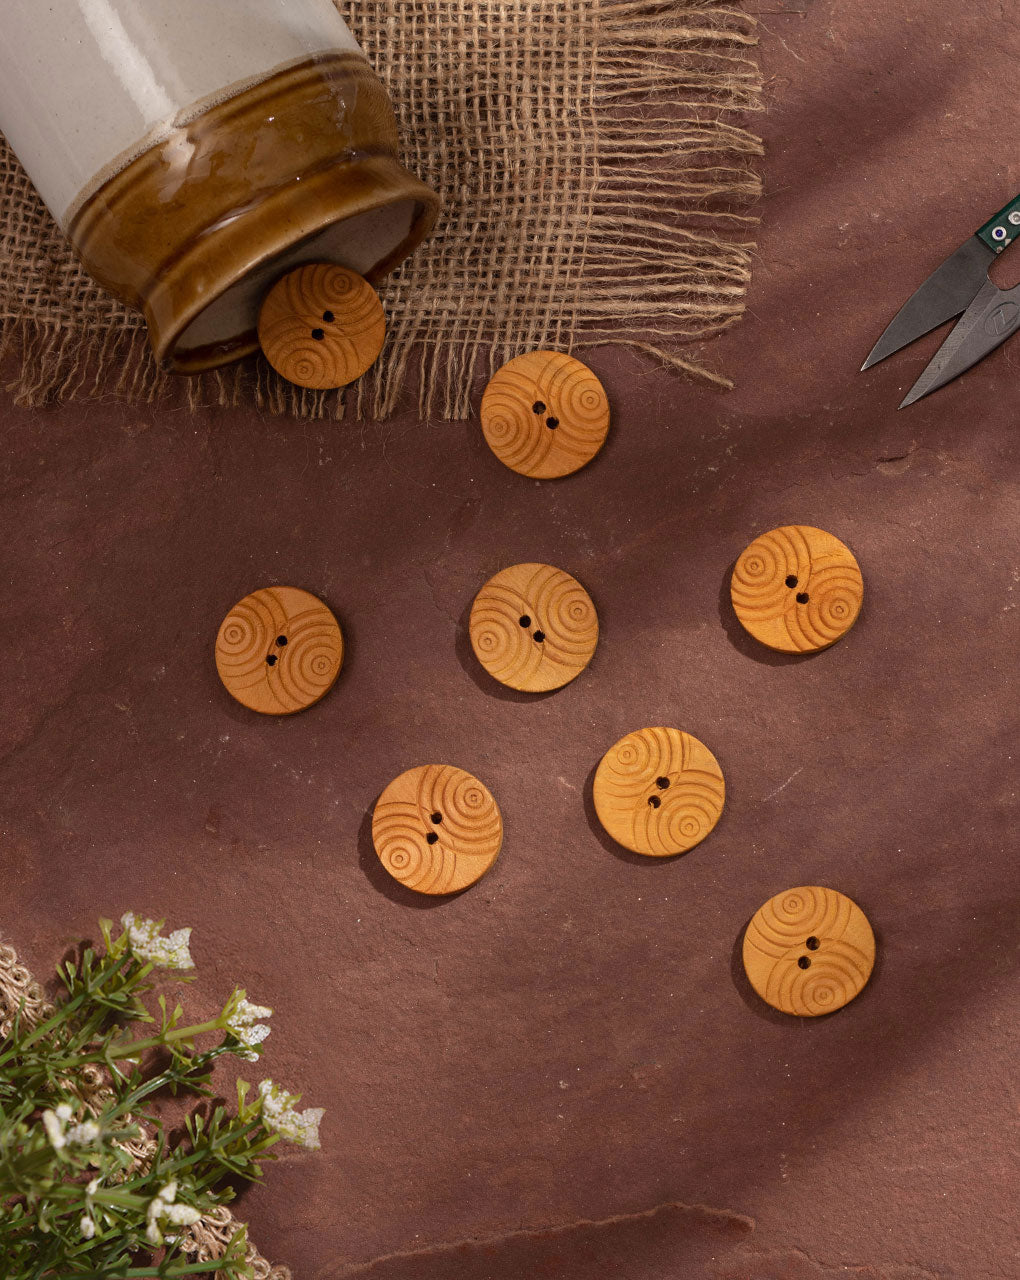 Engraved Wooden Buttons - Fabriclore.com